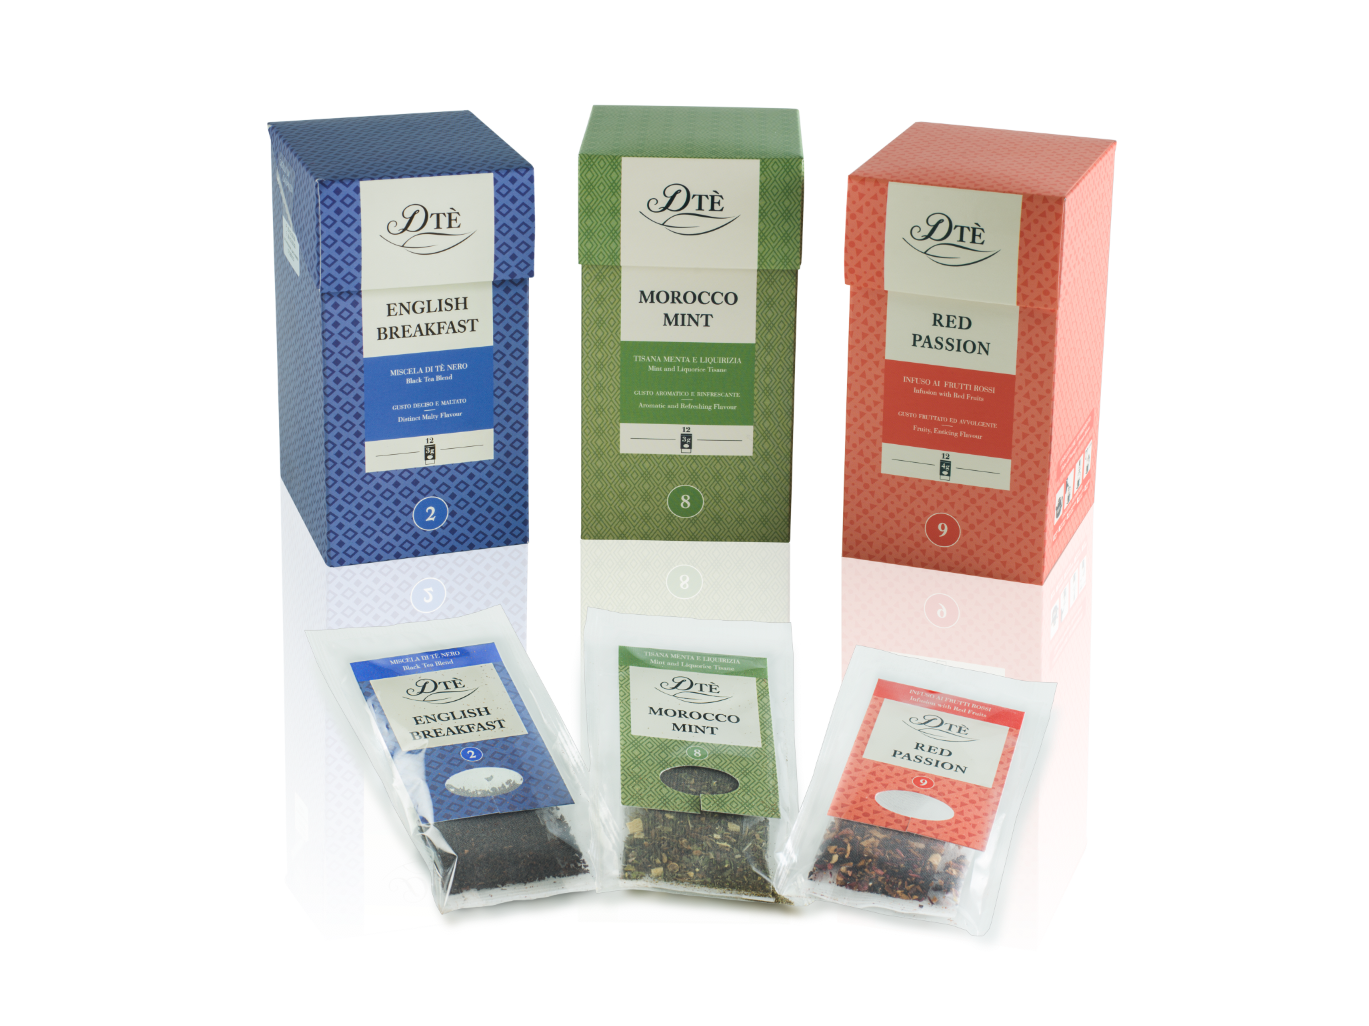 DTè - Teas and Infusions